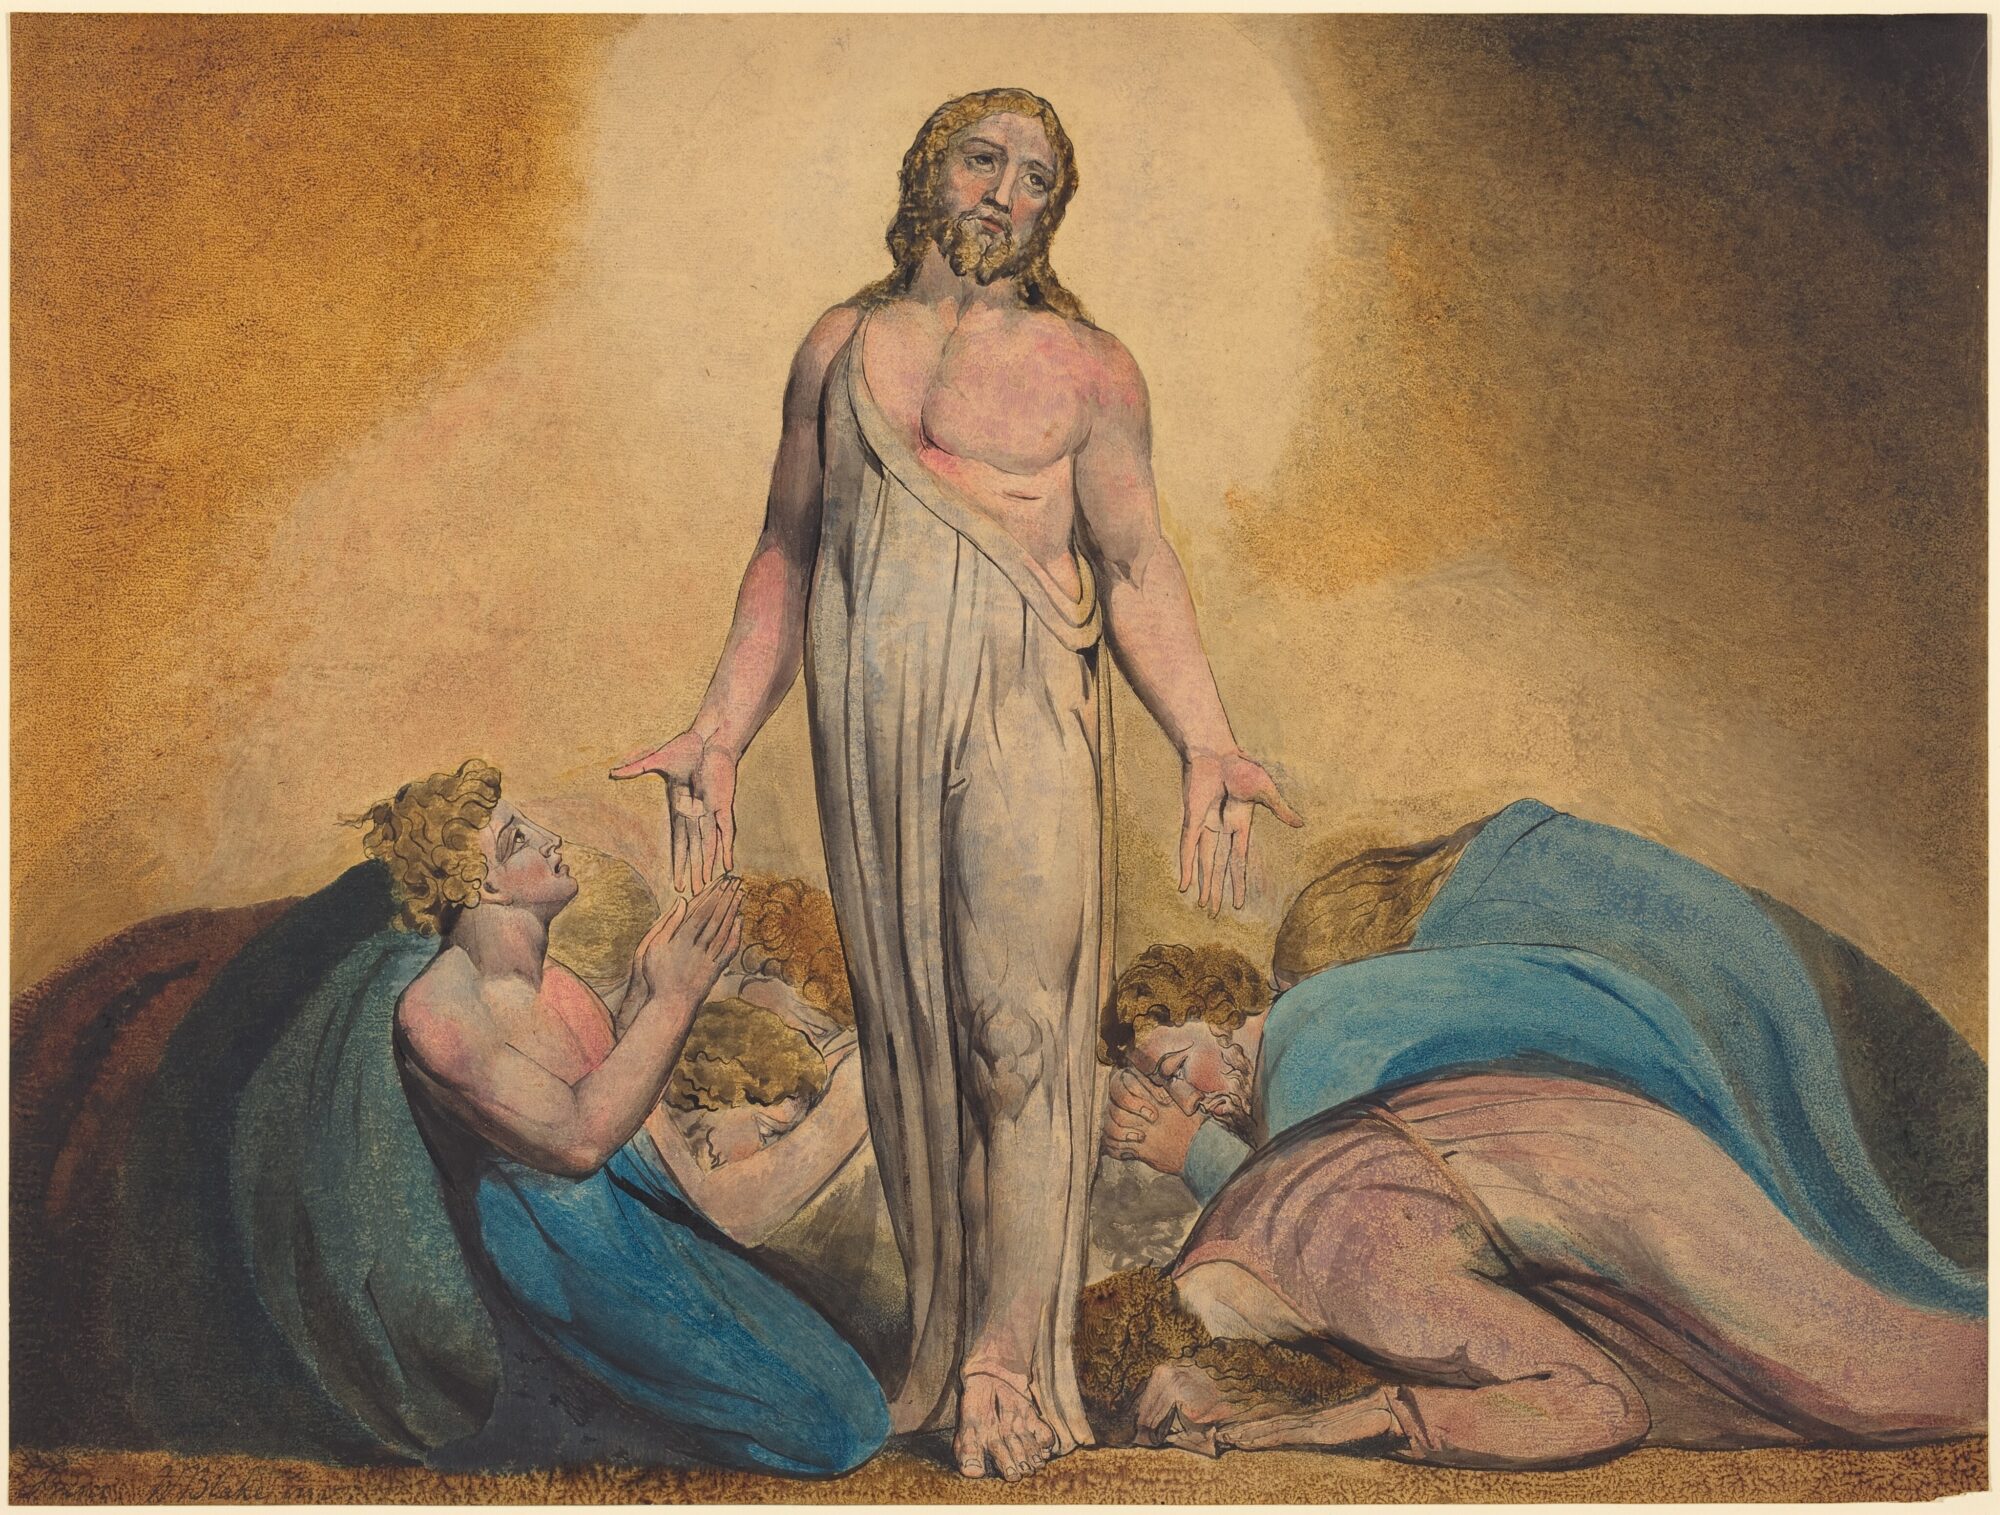 "Christ Appearing to His Disciples After the Resurrection" (c. 1795), a 43.2 x 57.5 color print hand-colored with watercolor and tempera by William Blake (1757-1827), located in the National Gallery of Art, Washington D.C.